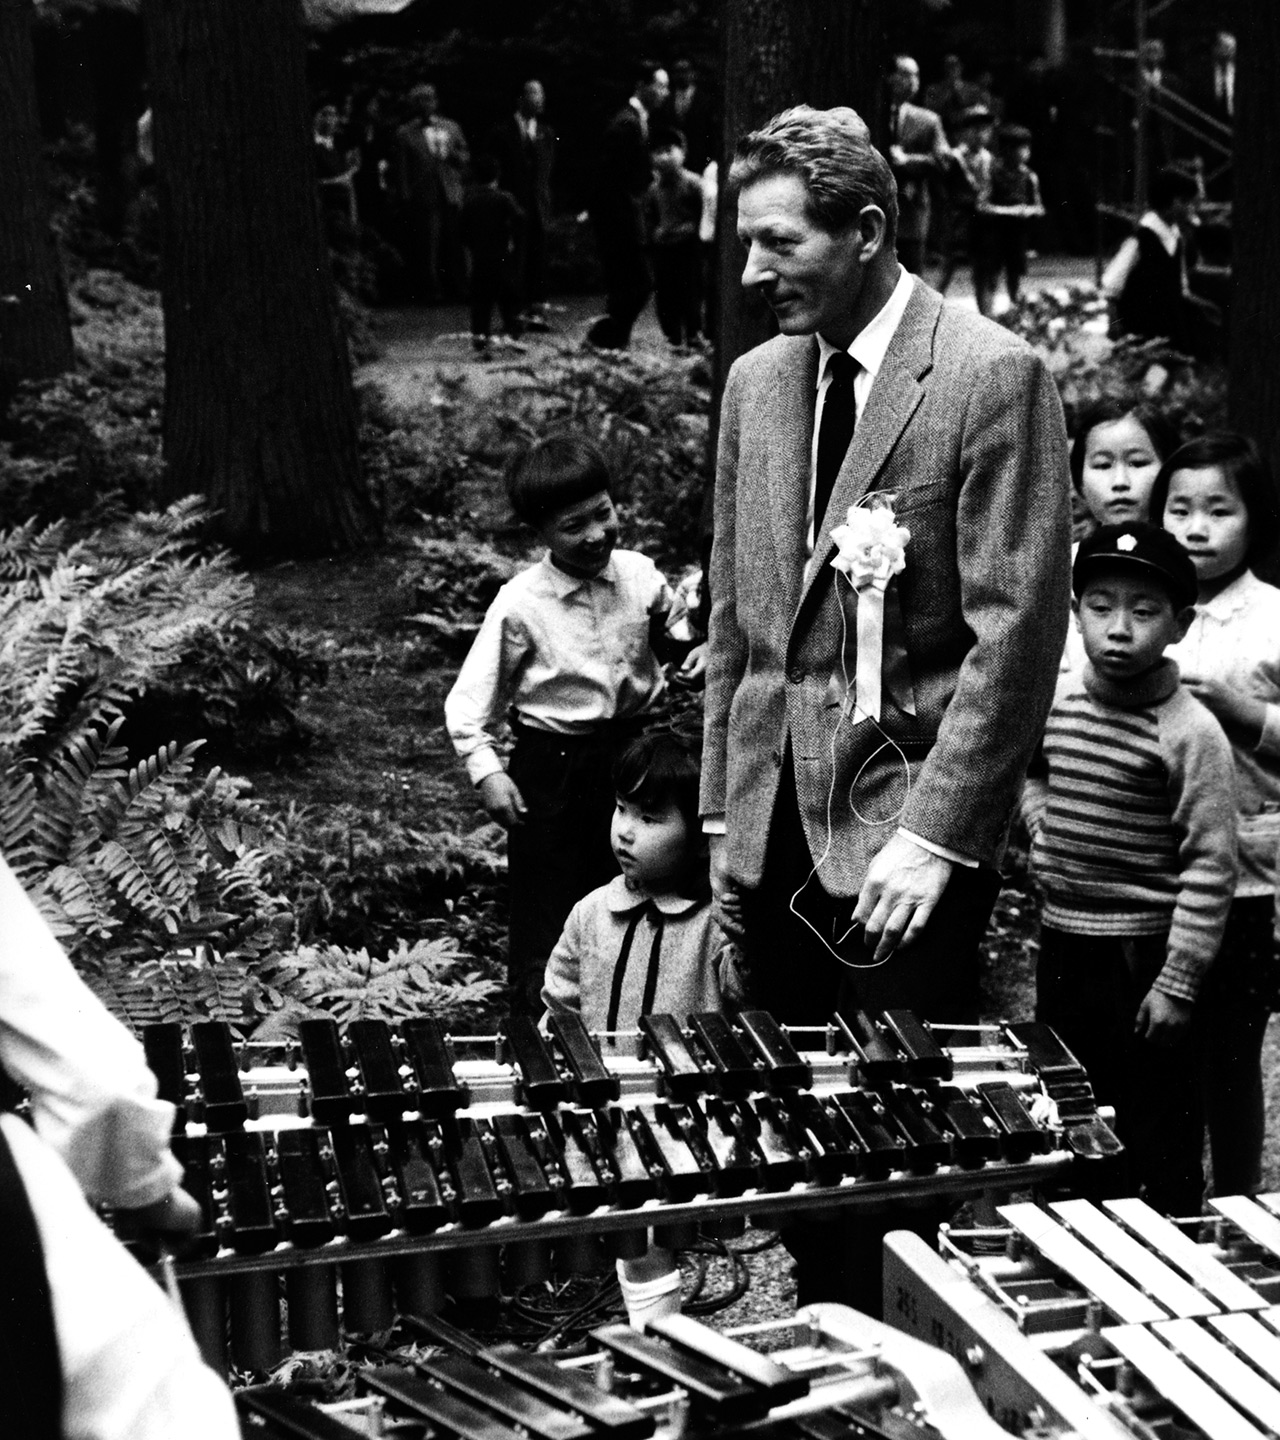 Image 1 of [ Danny Kaye, while on tour of Japan and six Asian nations, stands surrounded by children amidst trees in Japan? near xylophones?]